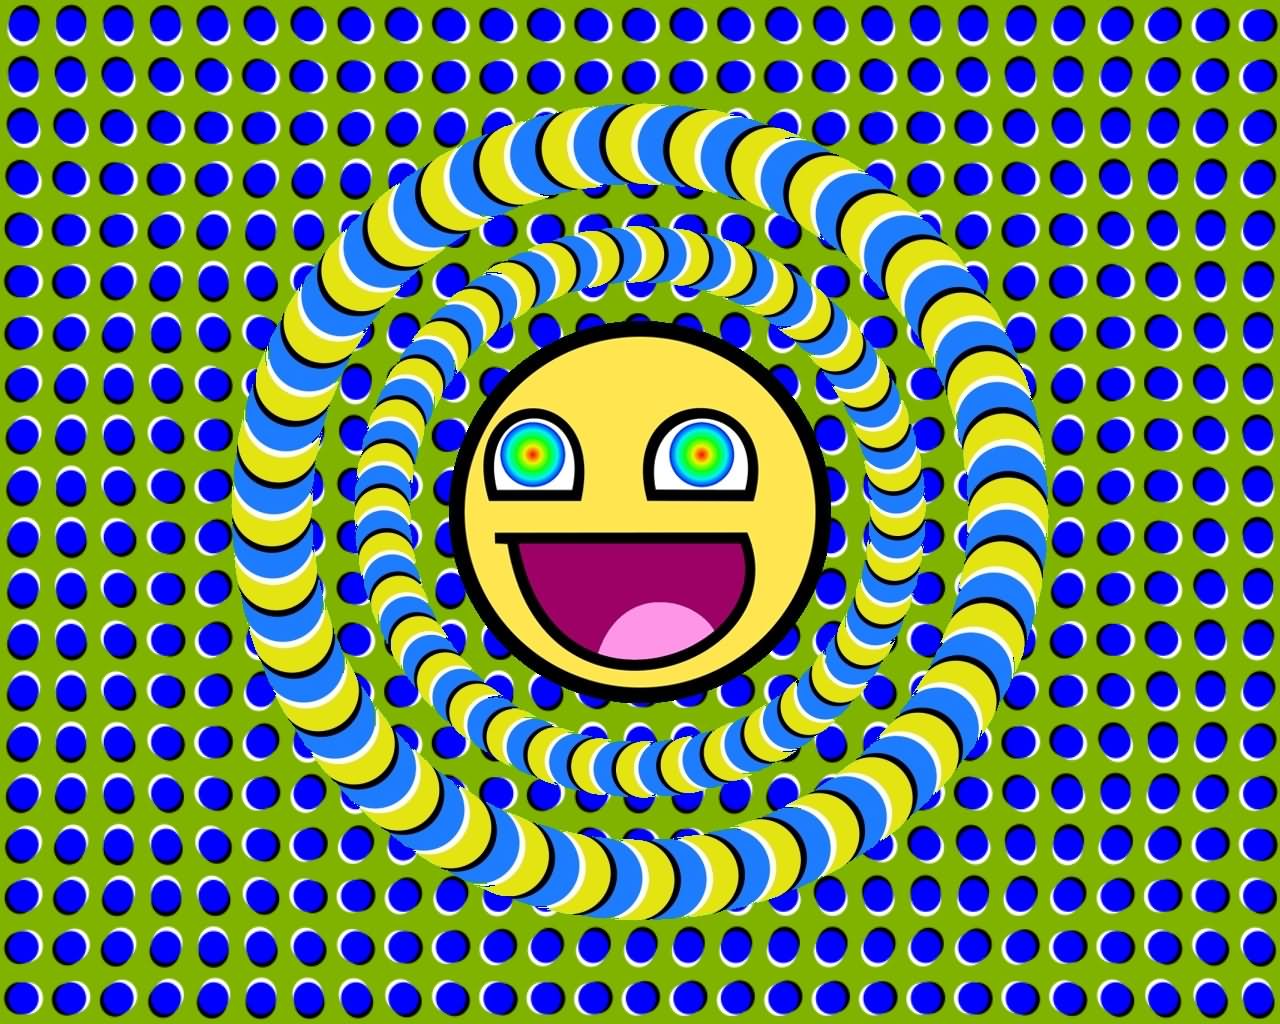 Smiley Face Optical Illusion Picture